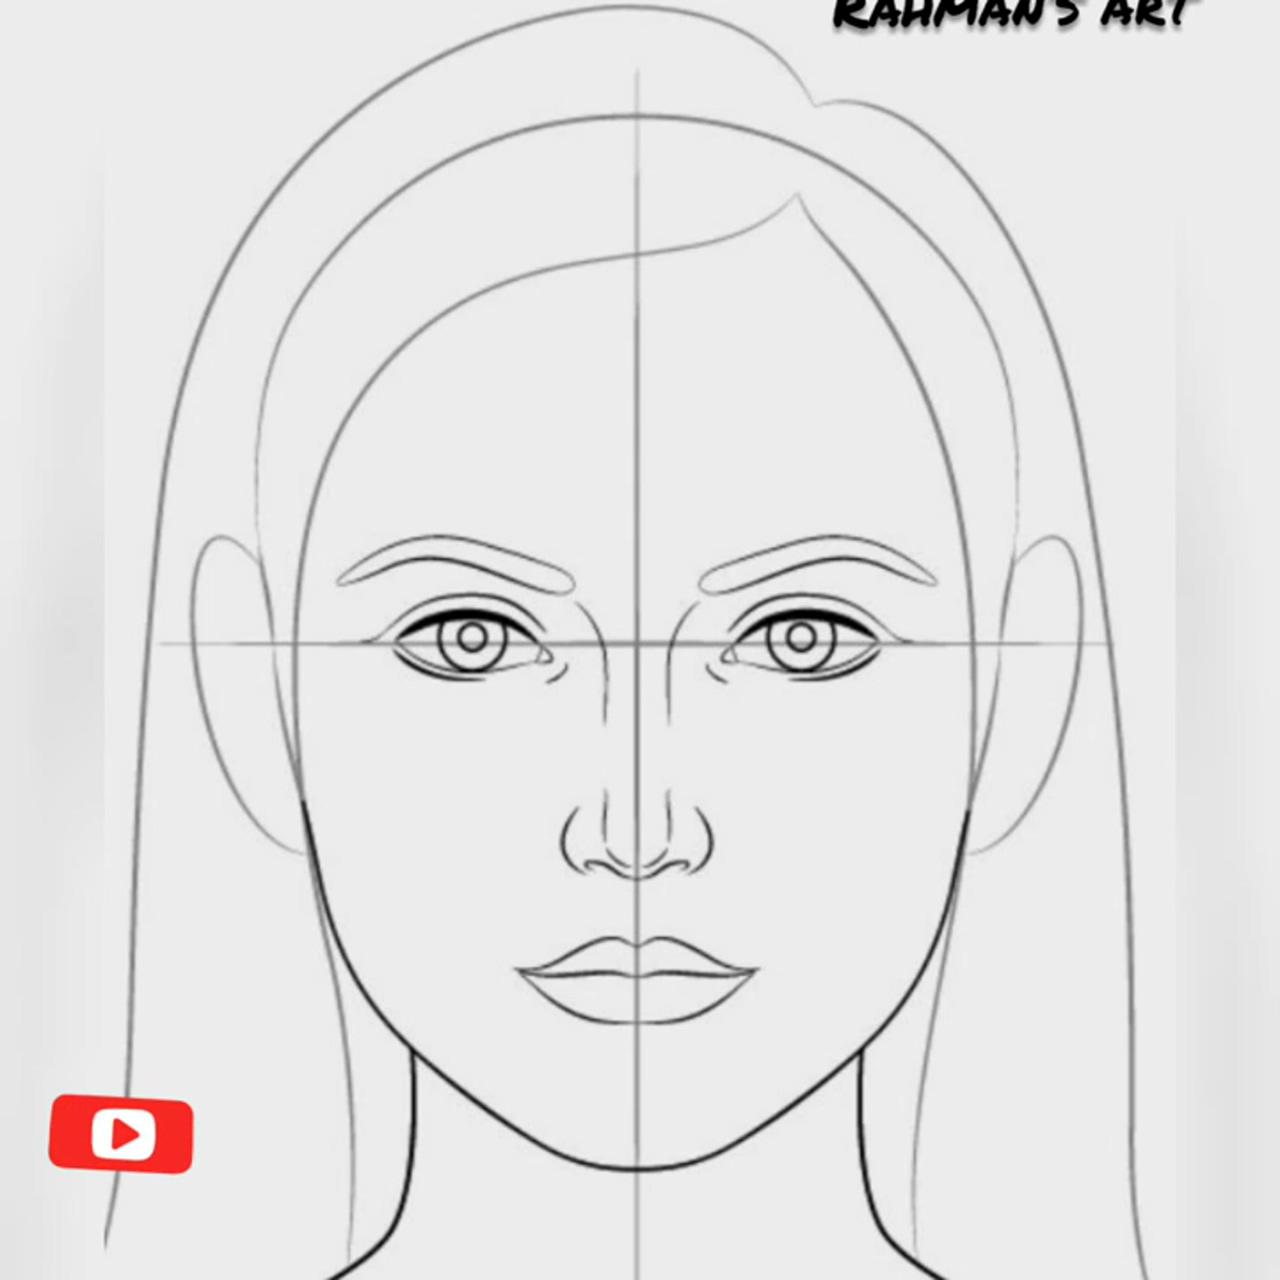 How to draw a beautiful face, face drawing step by step, how to draw a beautiful face step by step | anime eye drawing